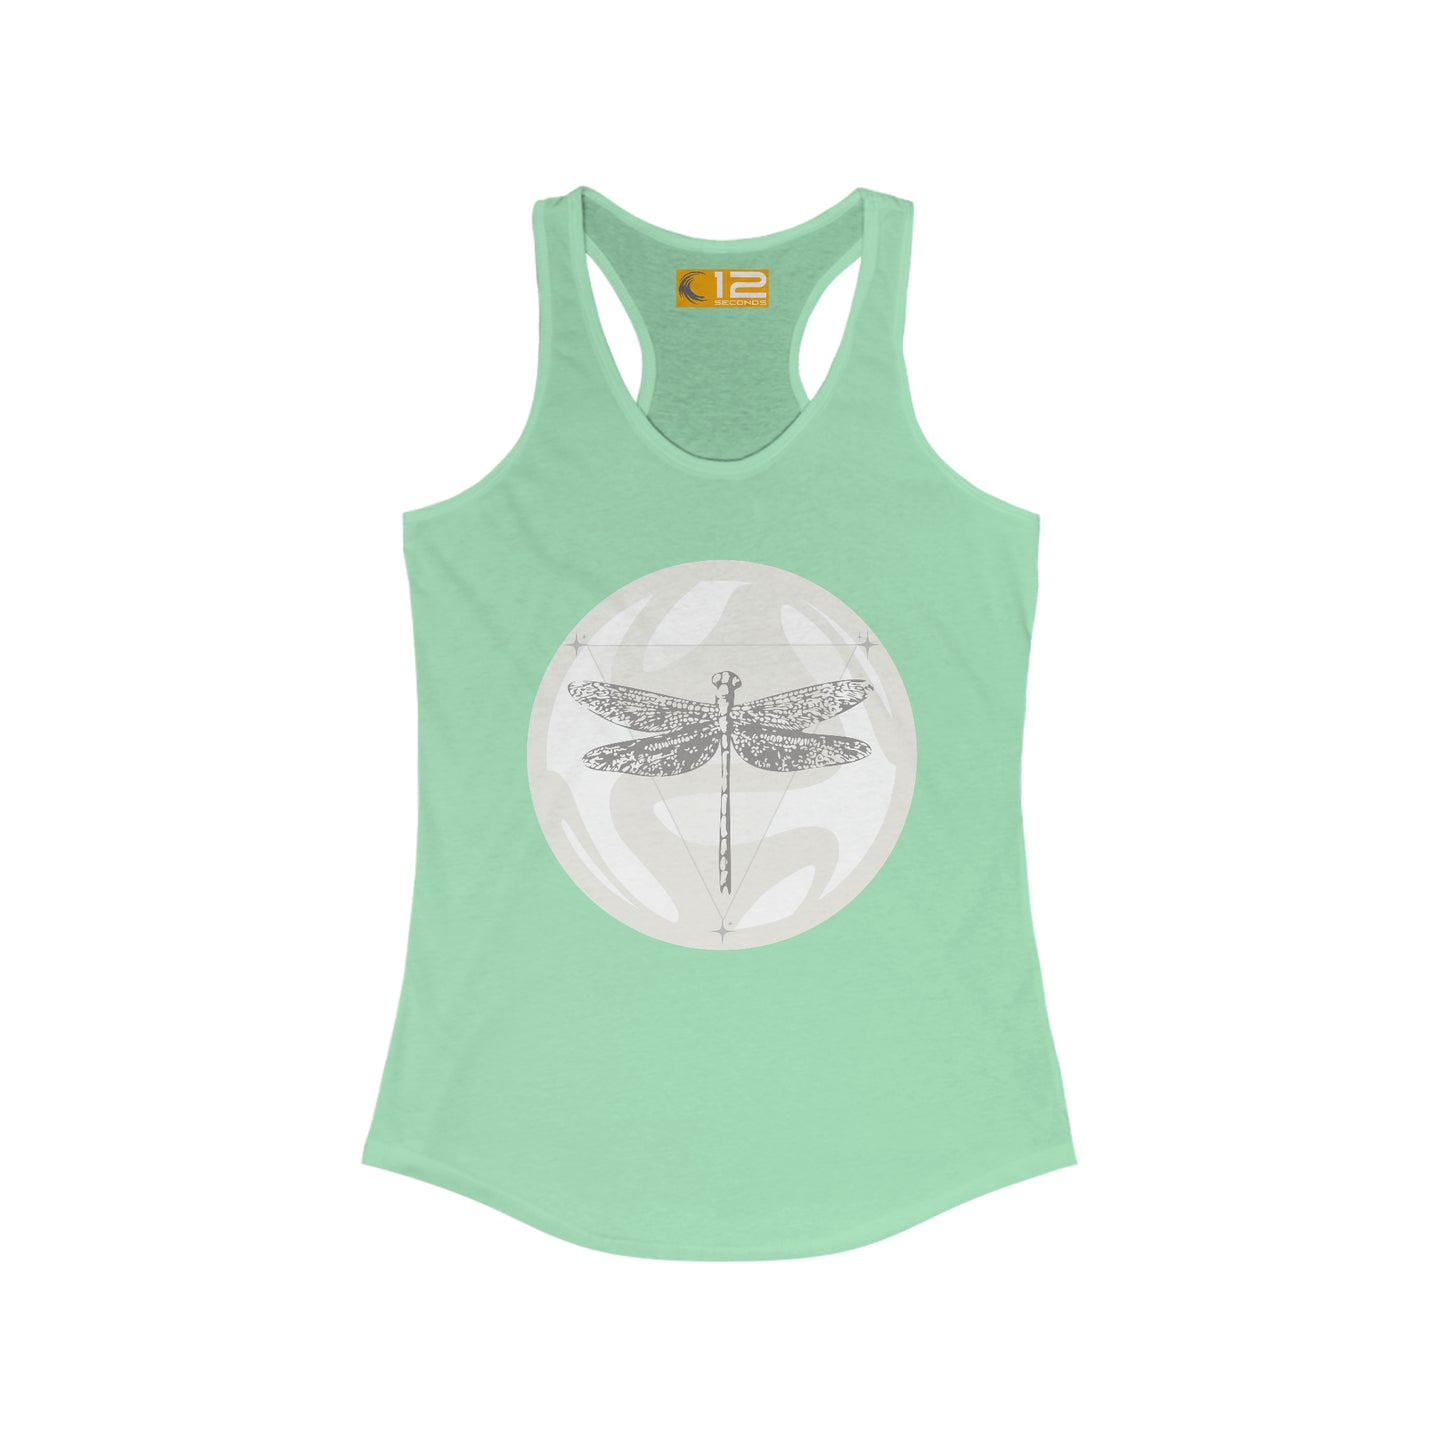 Women's Ideal Racerback Tank - ASTRAL DRAGONFLY - 12 SECONDS APPAREL